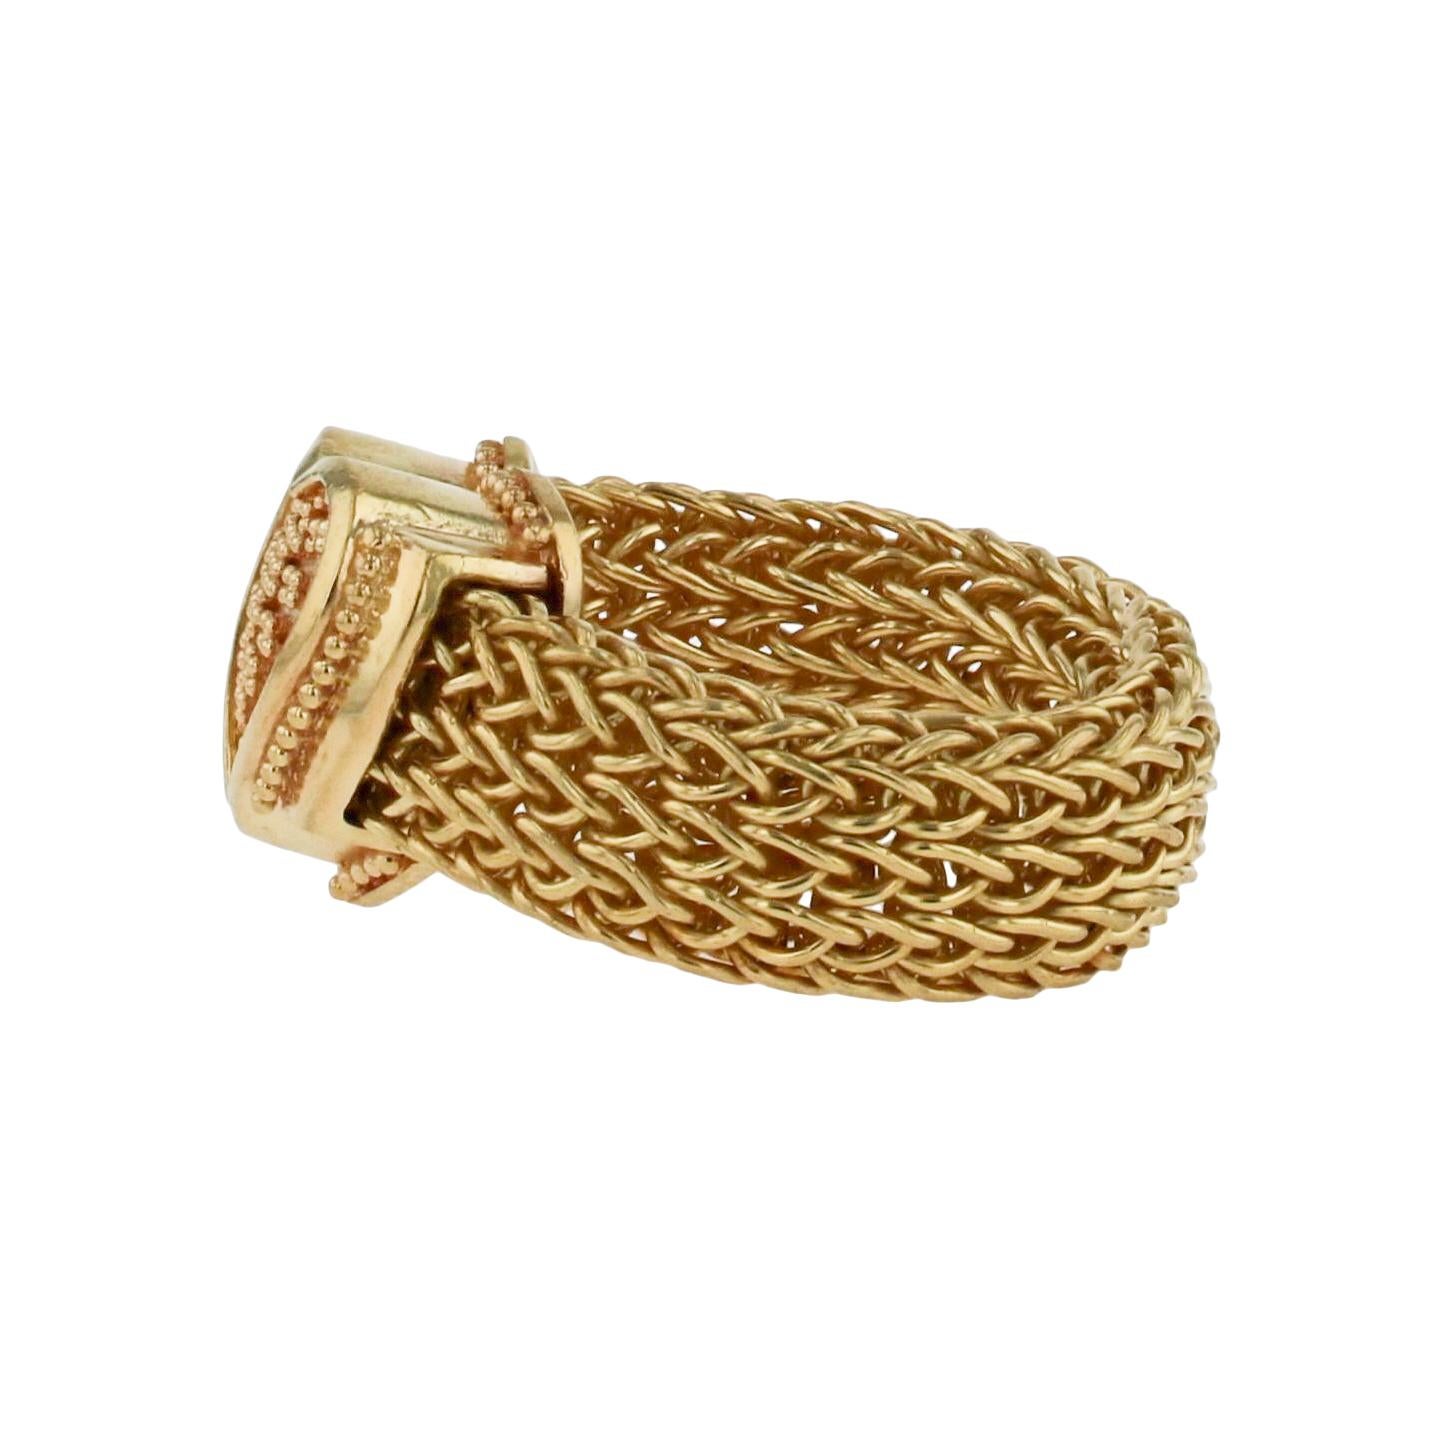 Artisan Kent Raible 18 Karat All Gold Heart Ring with a Woven Chain Band and Granulation For Sale